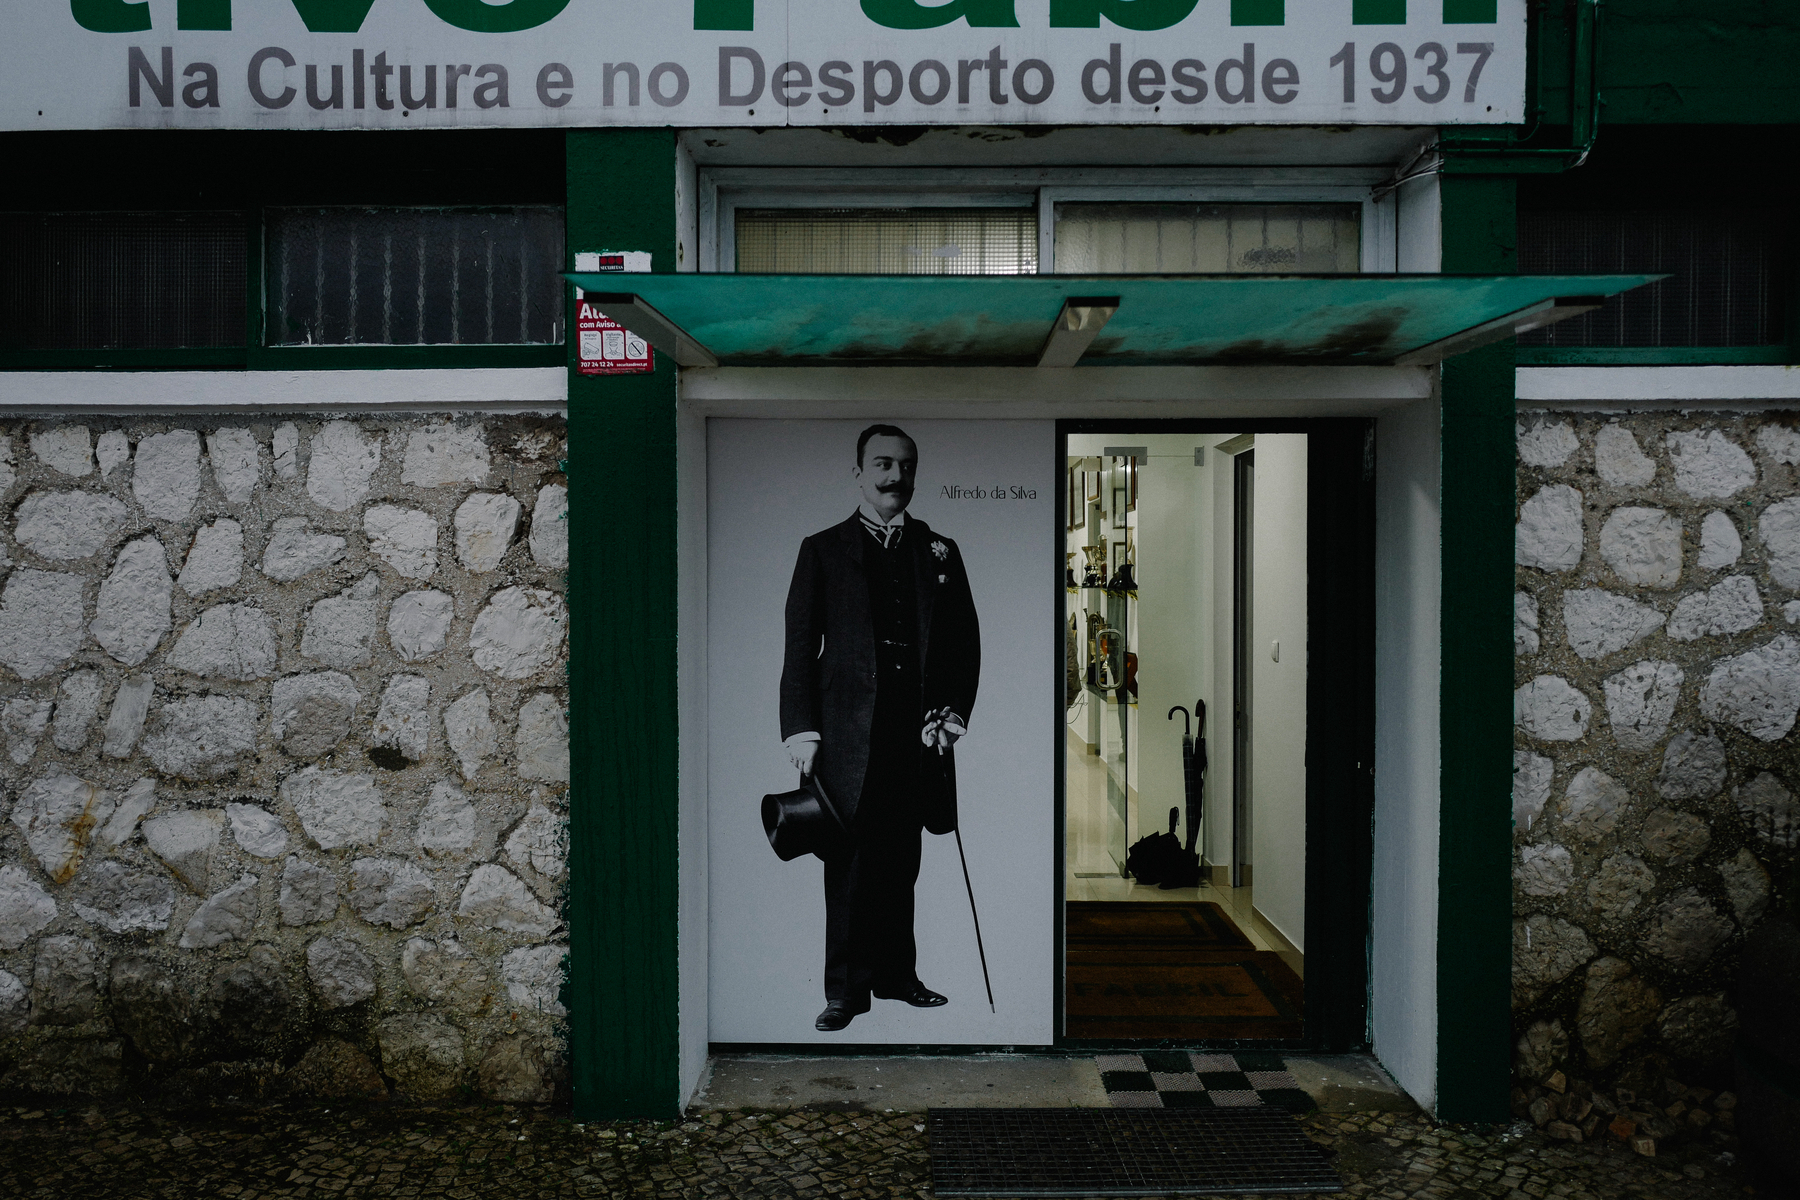 An entrance to a building with stone walls and an overhanging sign reading &ldquo;CULTURA Na Cultura e no Desporto desde 1937.&rdquo; A black and white photograph of a man in a suit and top hat is displayed in the doorway.